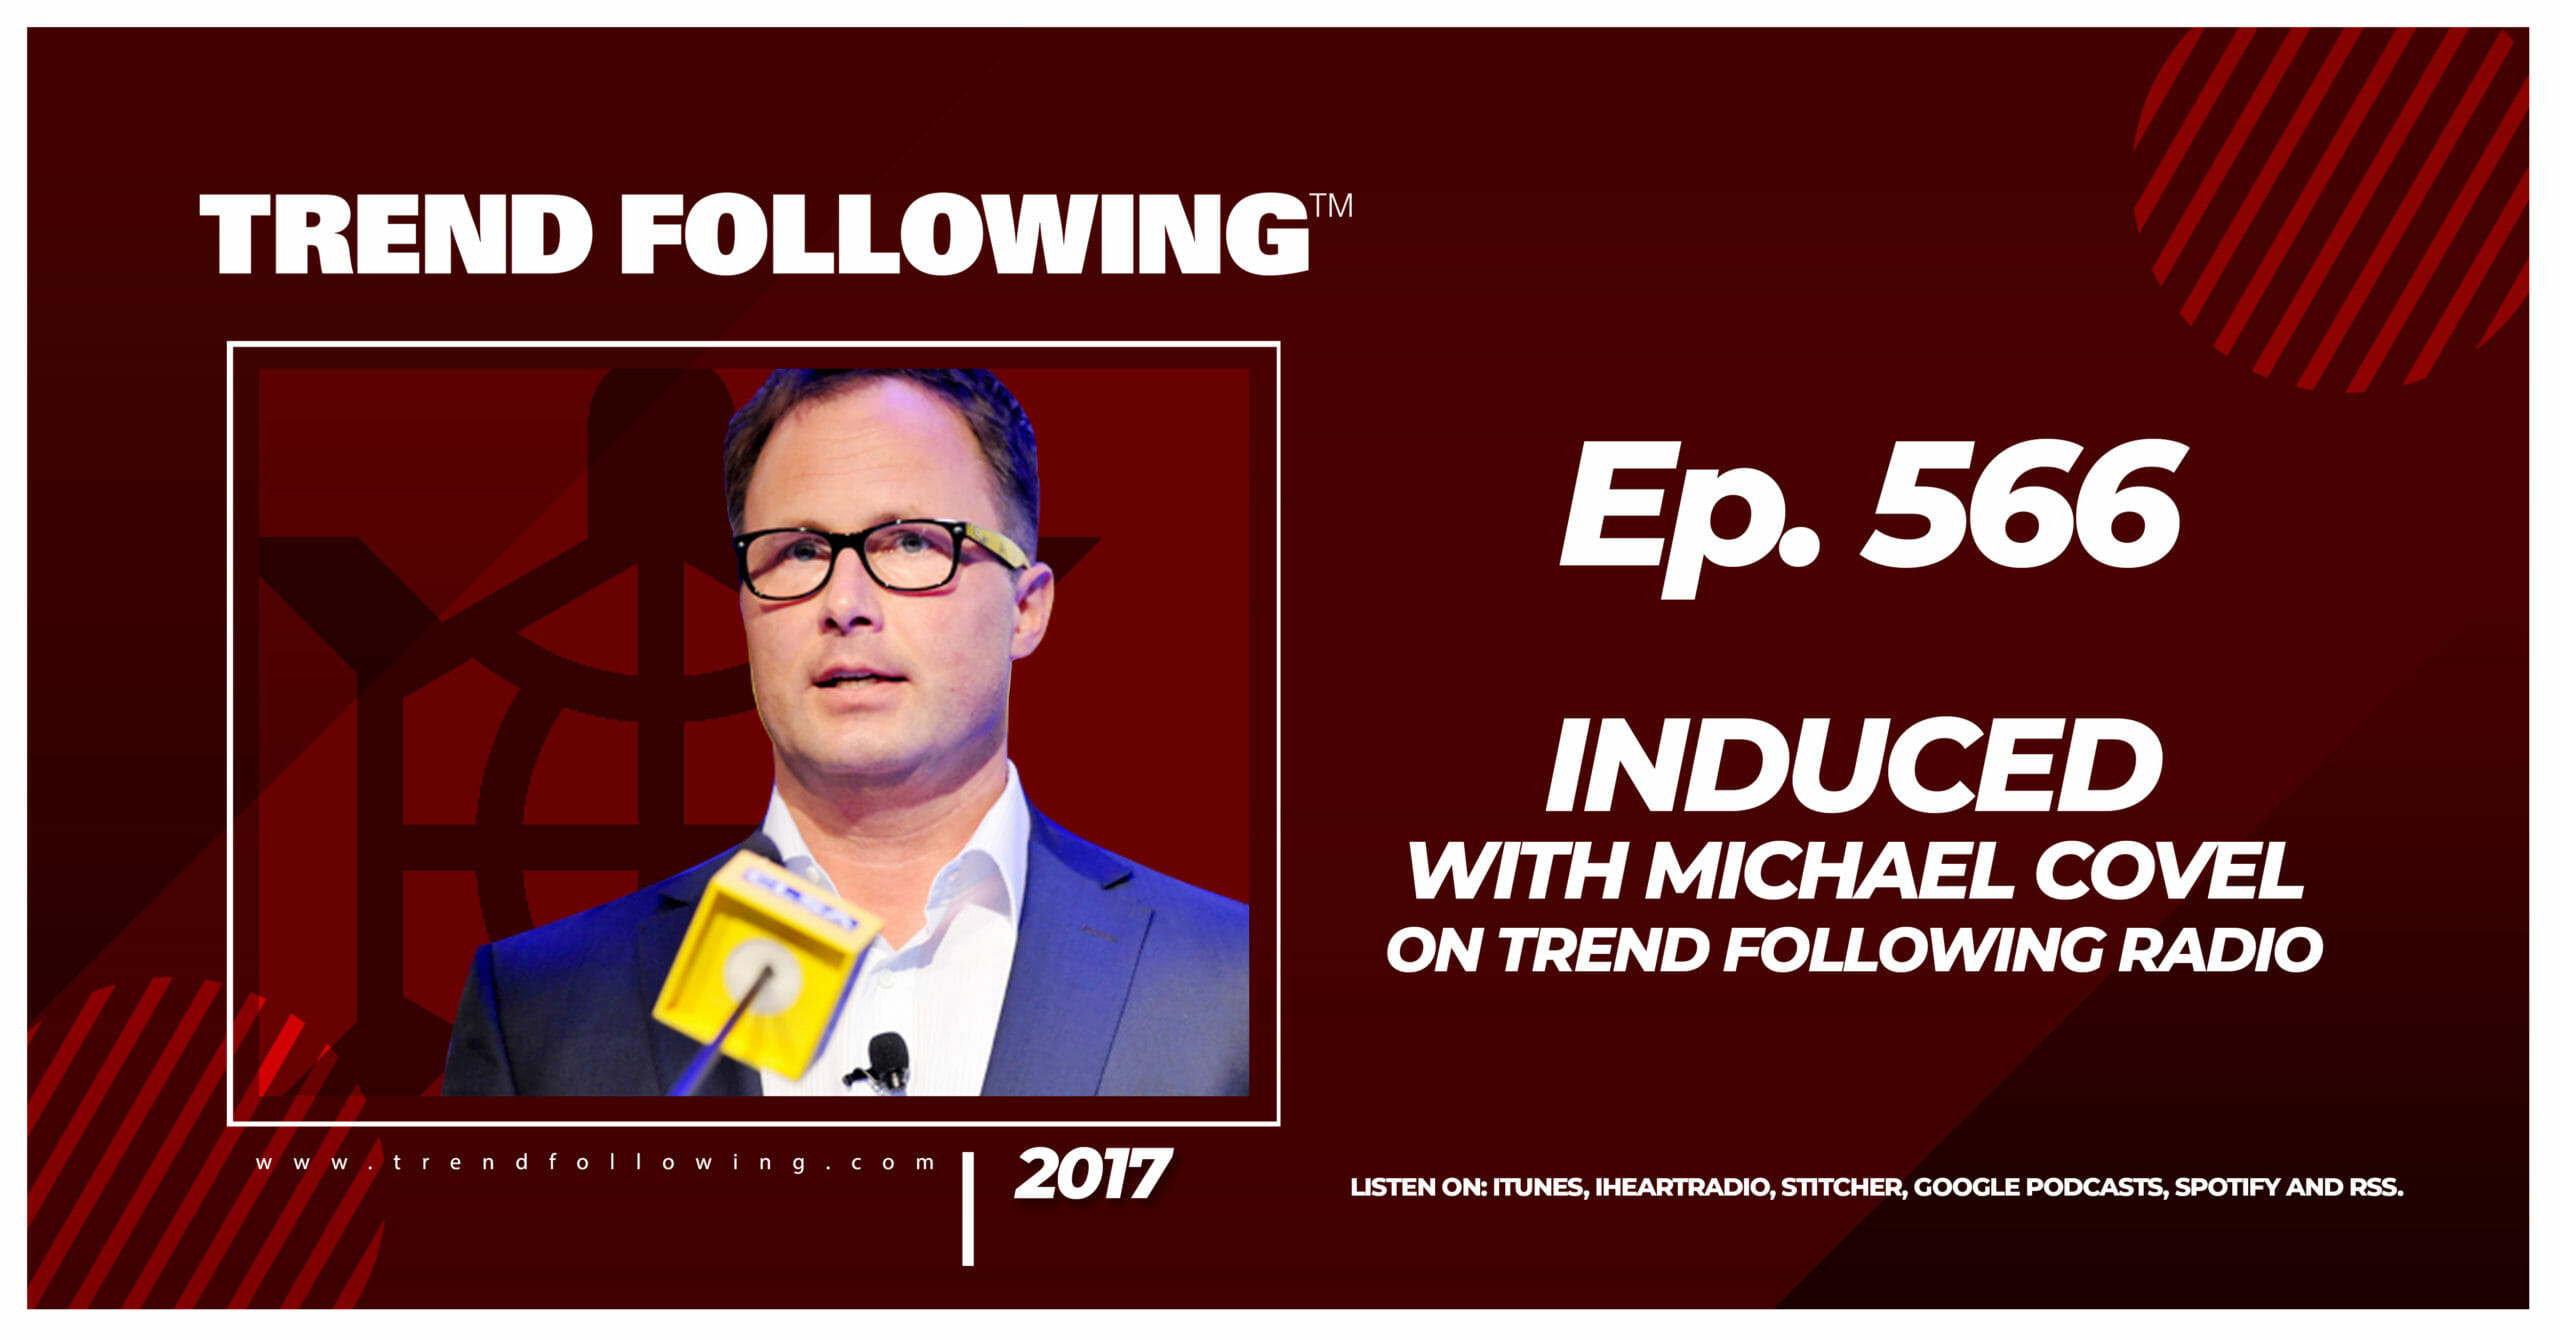 Induced with Michael Covel on Trend Following Radio